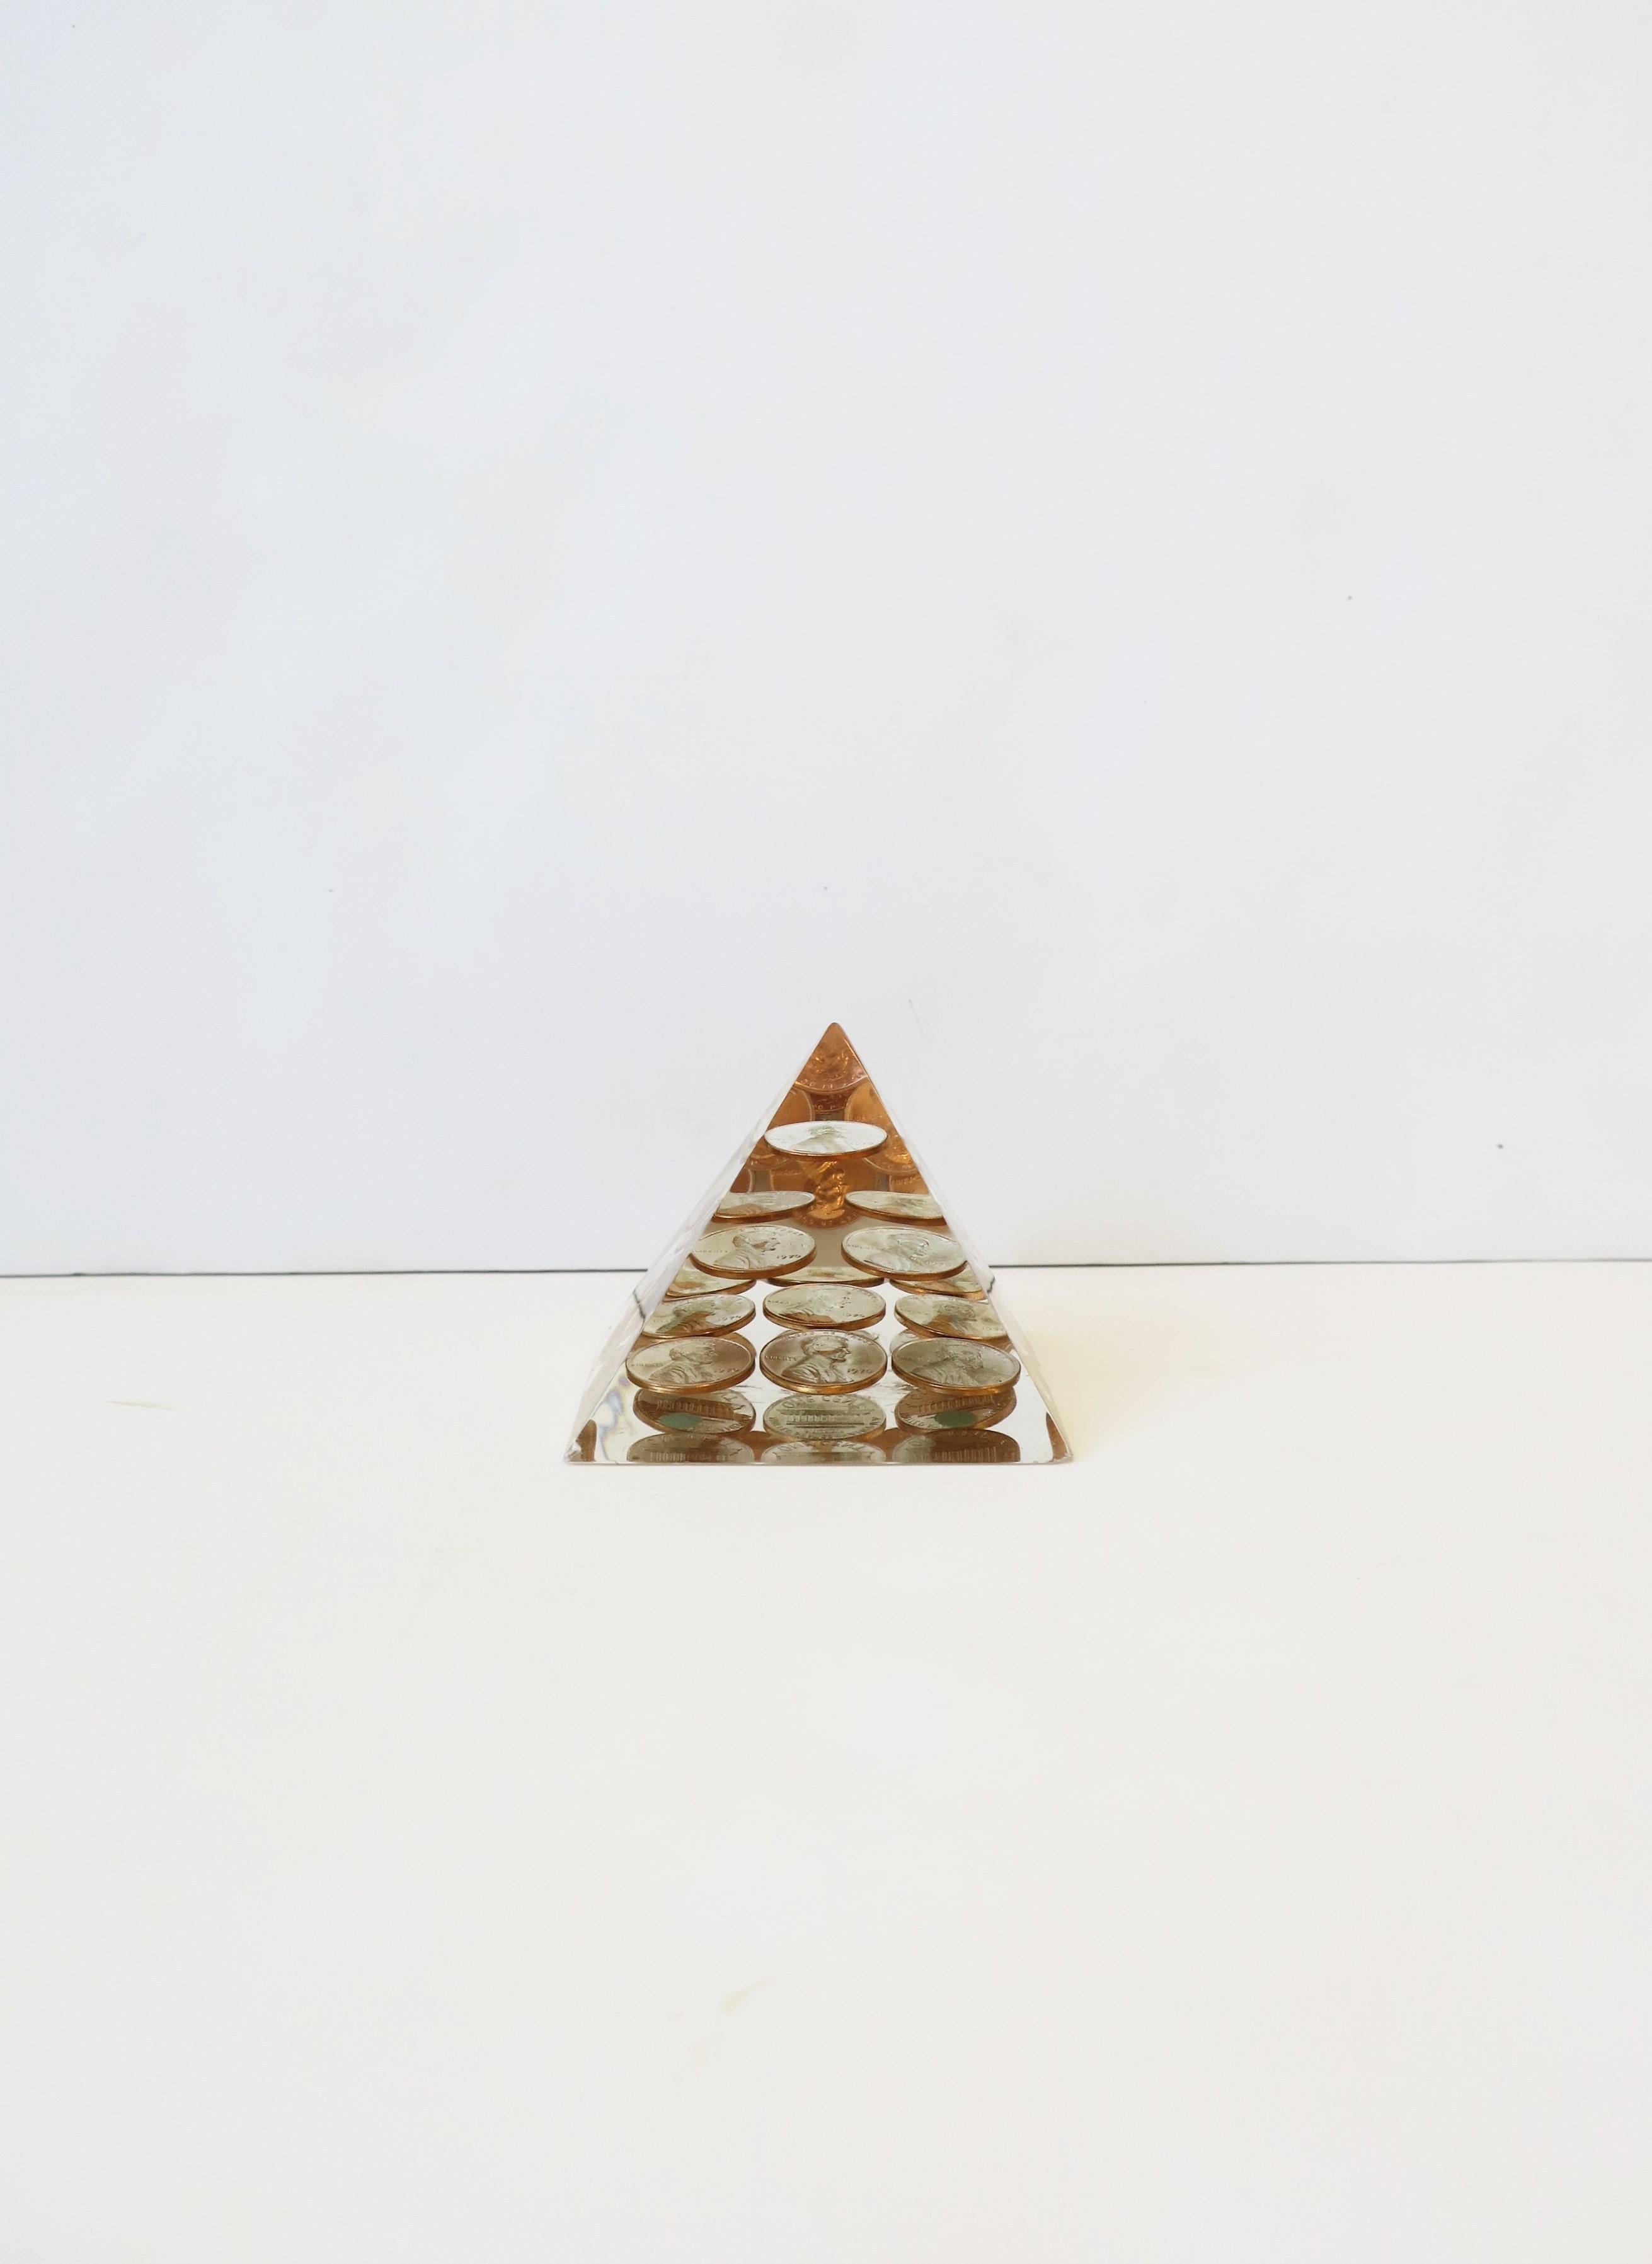 An acrylic and 1970s US copper penny pyramid paperweight or decorative object, circa late-20th century, USA. Object is comprised of all 1970s US copper pennies. A great desk, cocktail table, bookshelf, etc., decorative object. Dimensions: 2.88